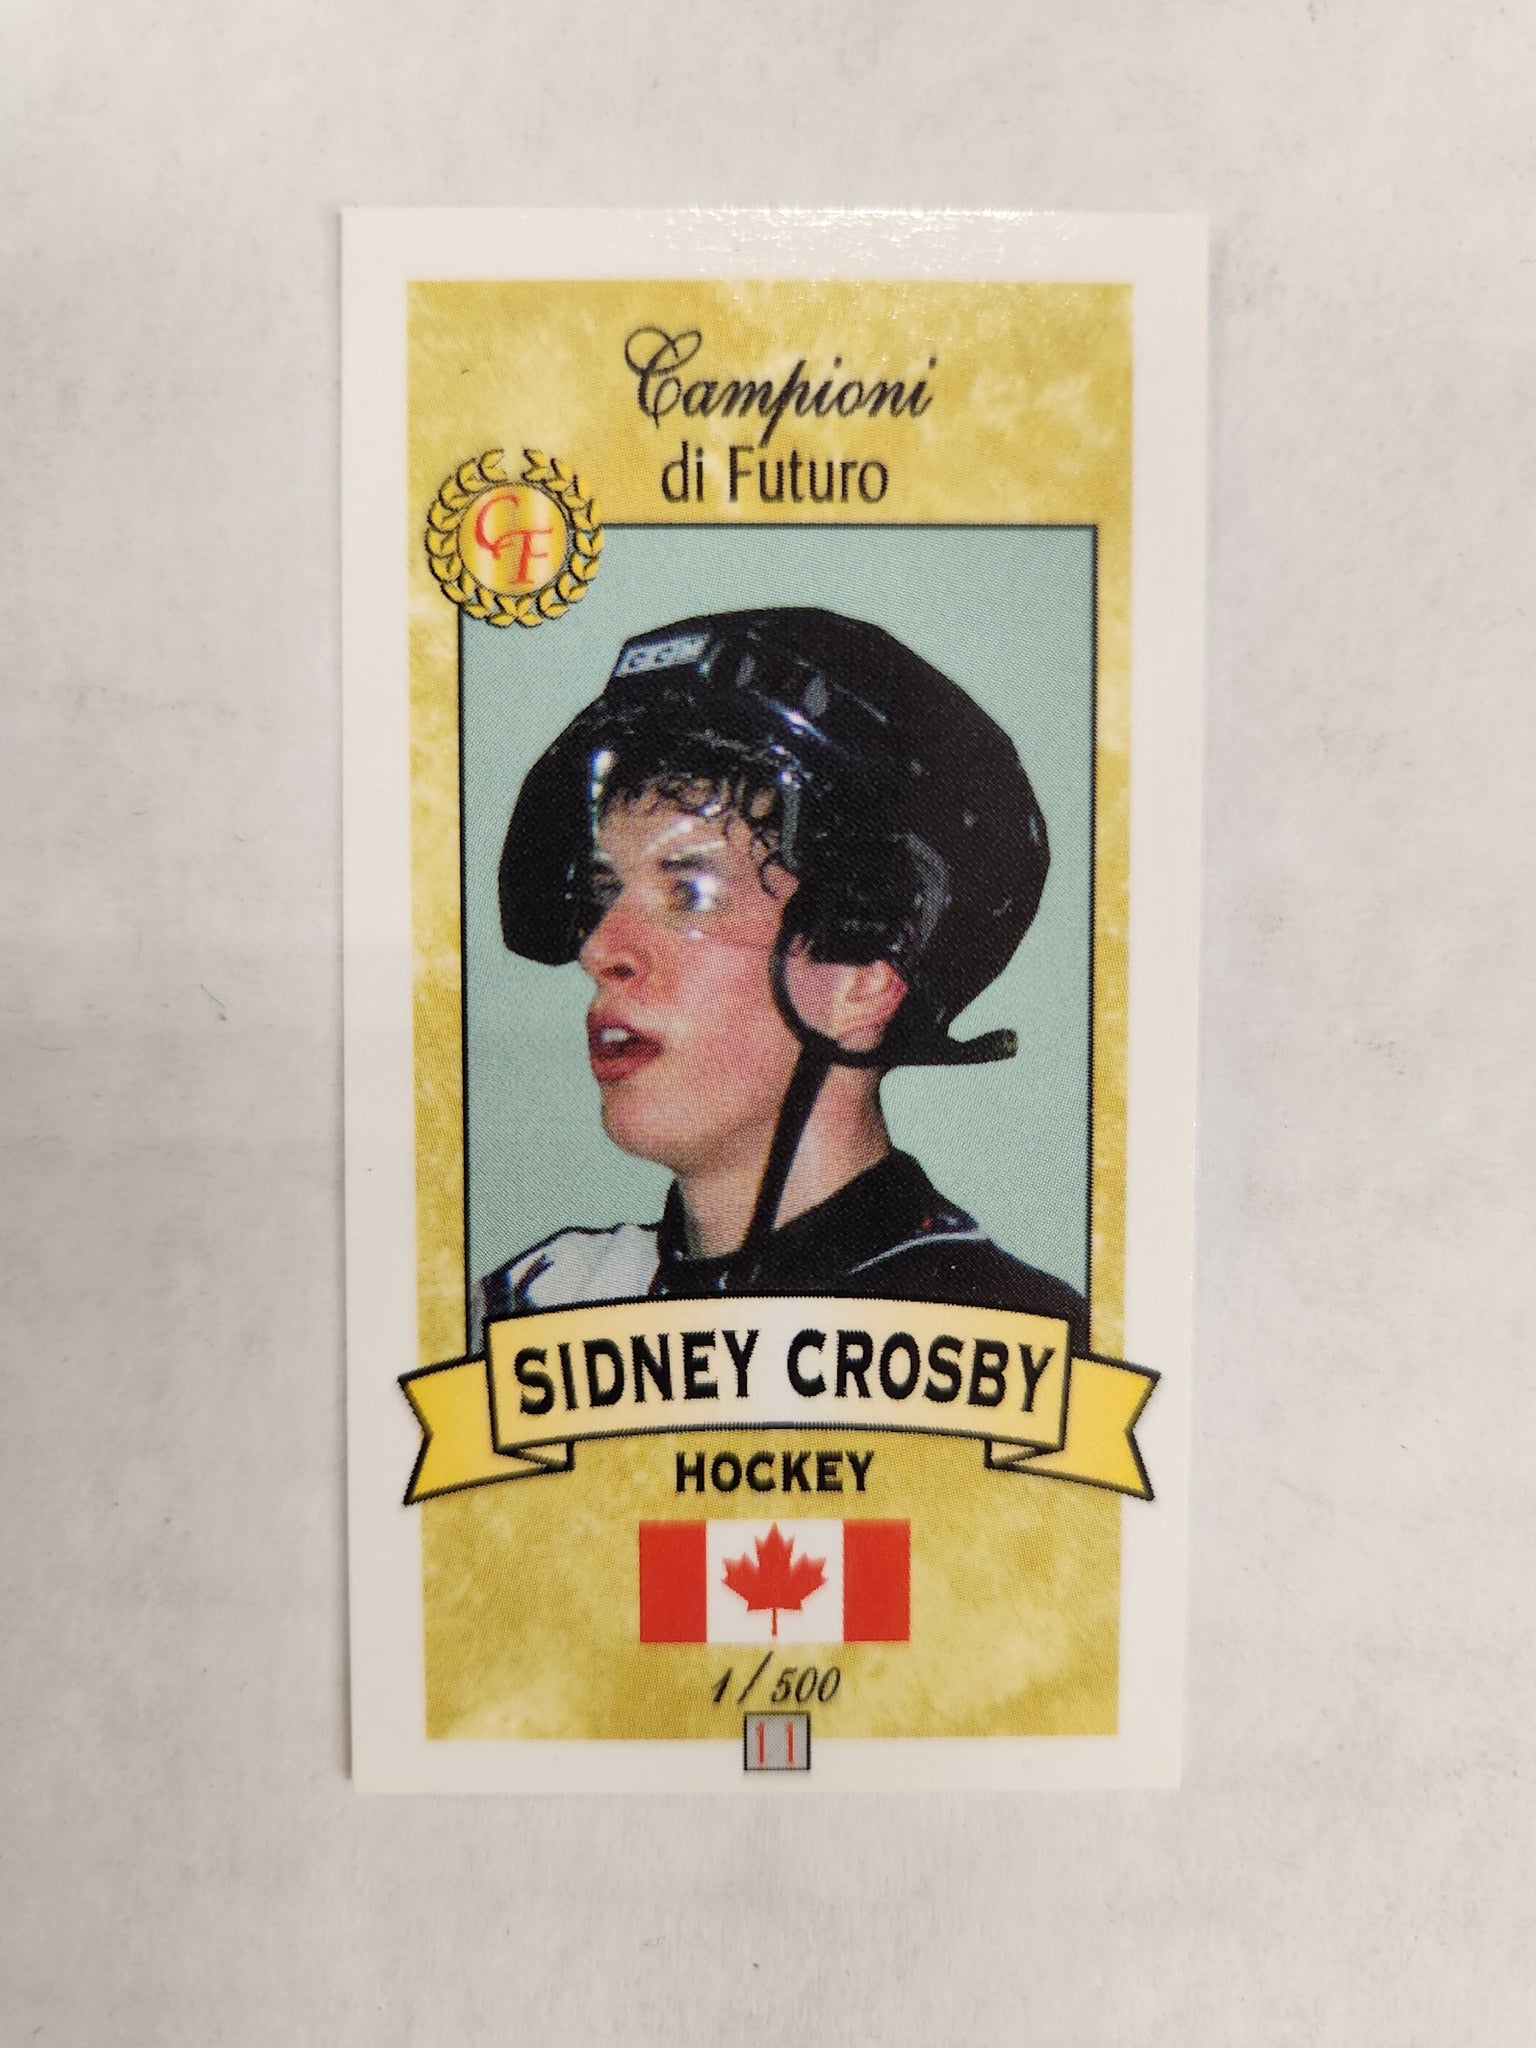 2003-04 Campioni Di Futuro Sidney Crosby Gold Parallel 1/500 #11 RC (Rookie Card) (Consignment) (AC)